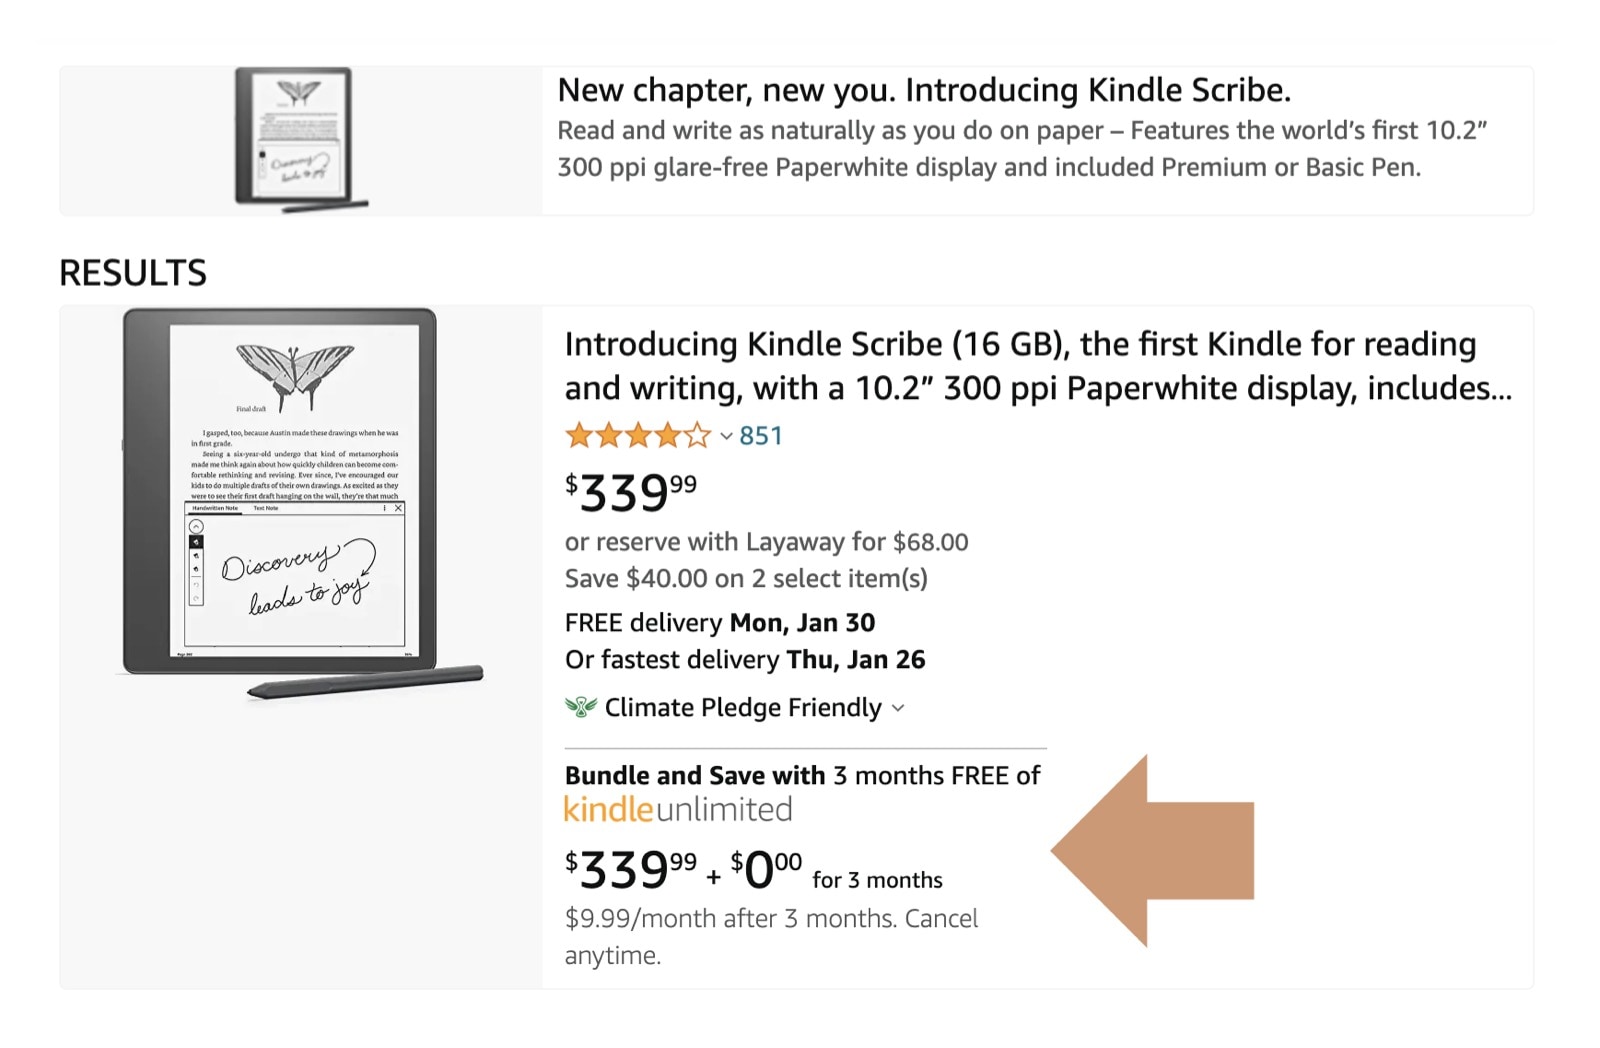 Kindle Unlimited free offers are now displayed in search results for Kindle